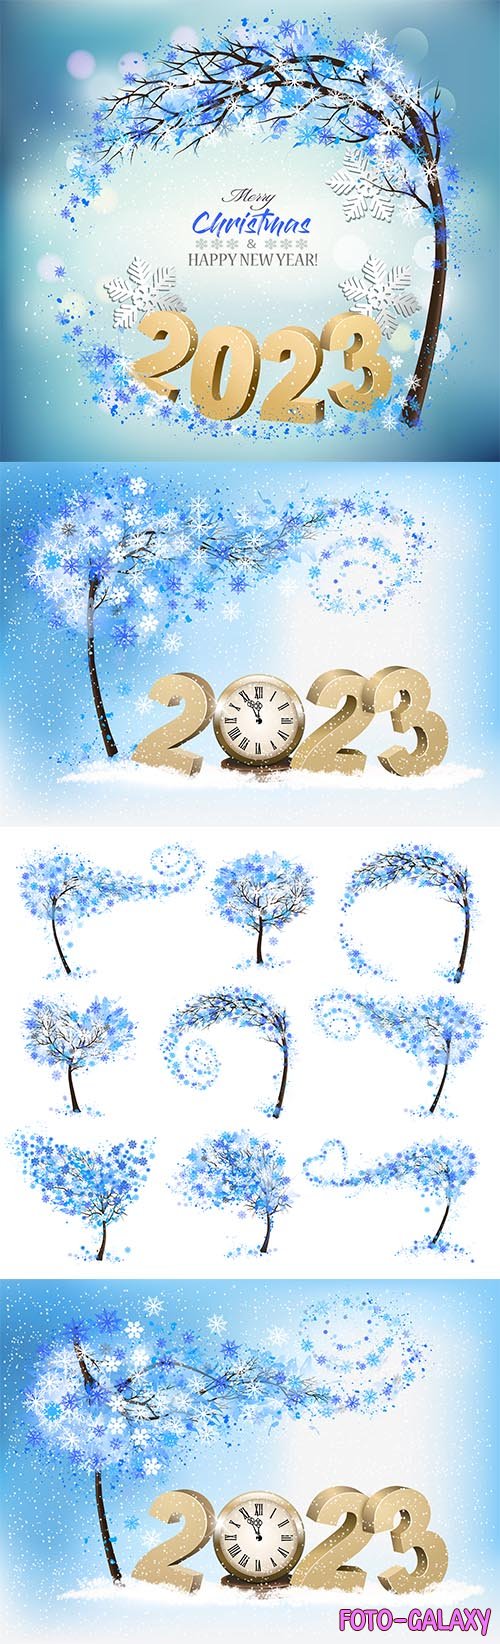 Vector merry christmas and happy new year background with 2023 letters and christmas tree with snowflakes vector